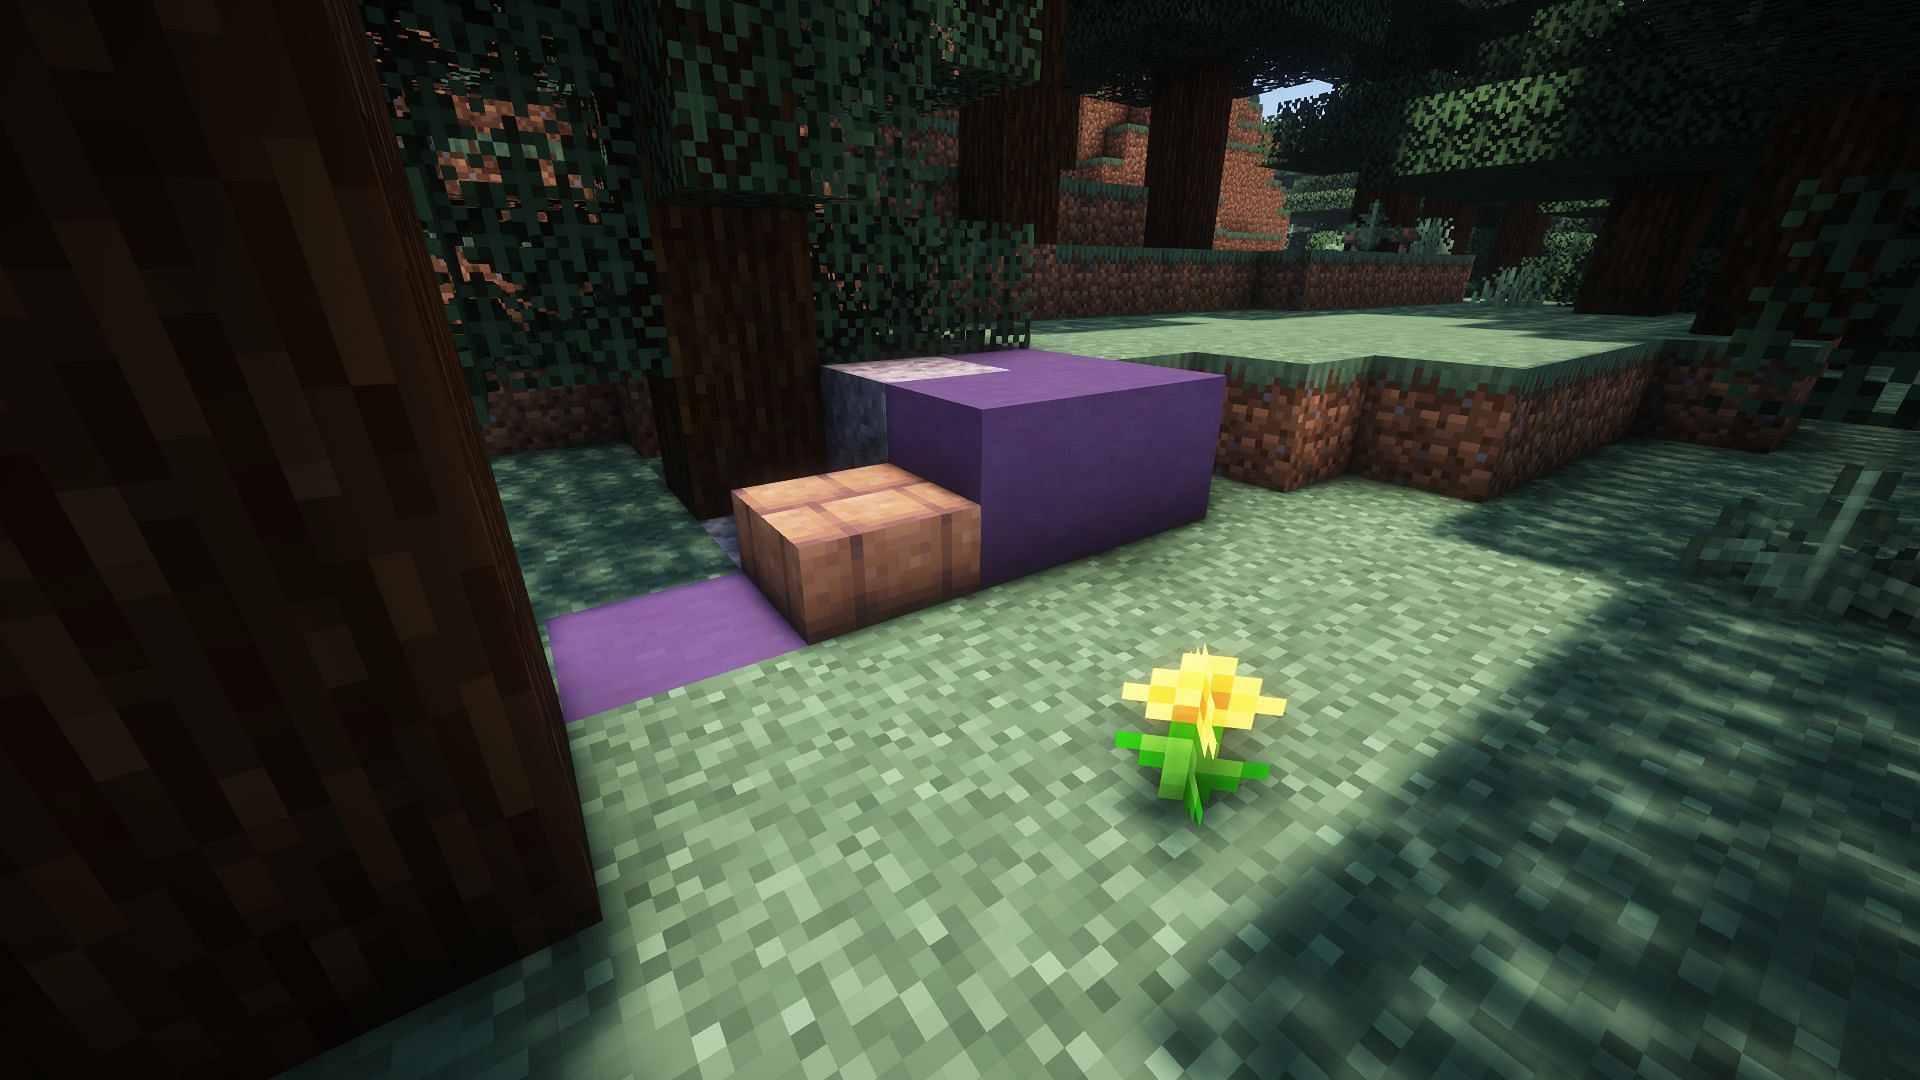 Shaders and loads of mods will require more RAM in Minecraft (Image via Mojang)